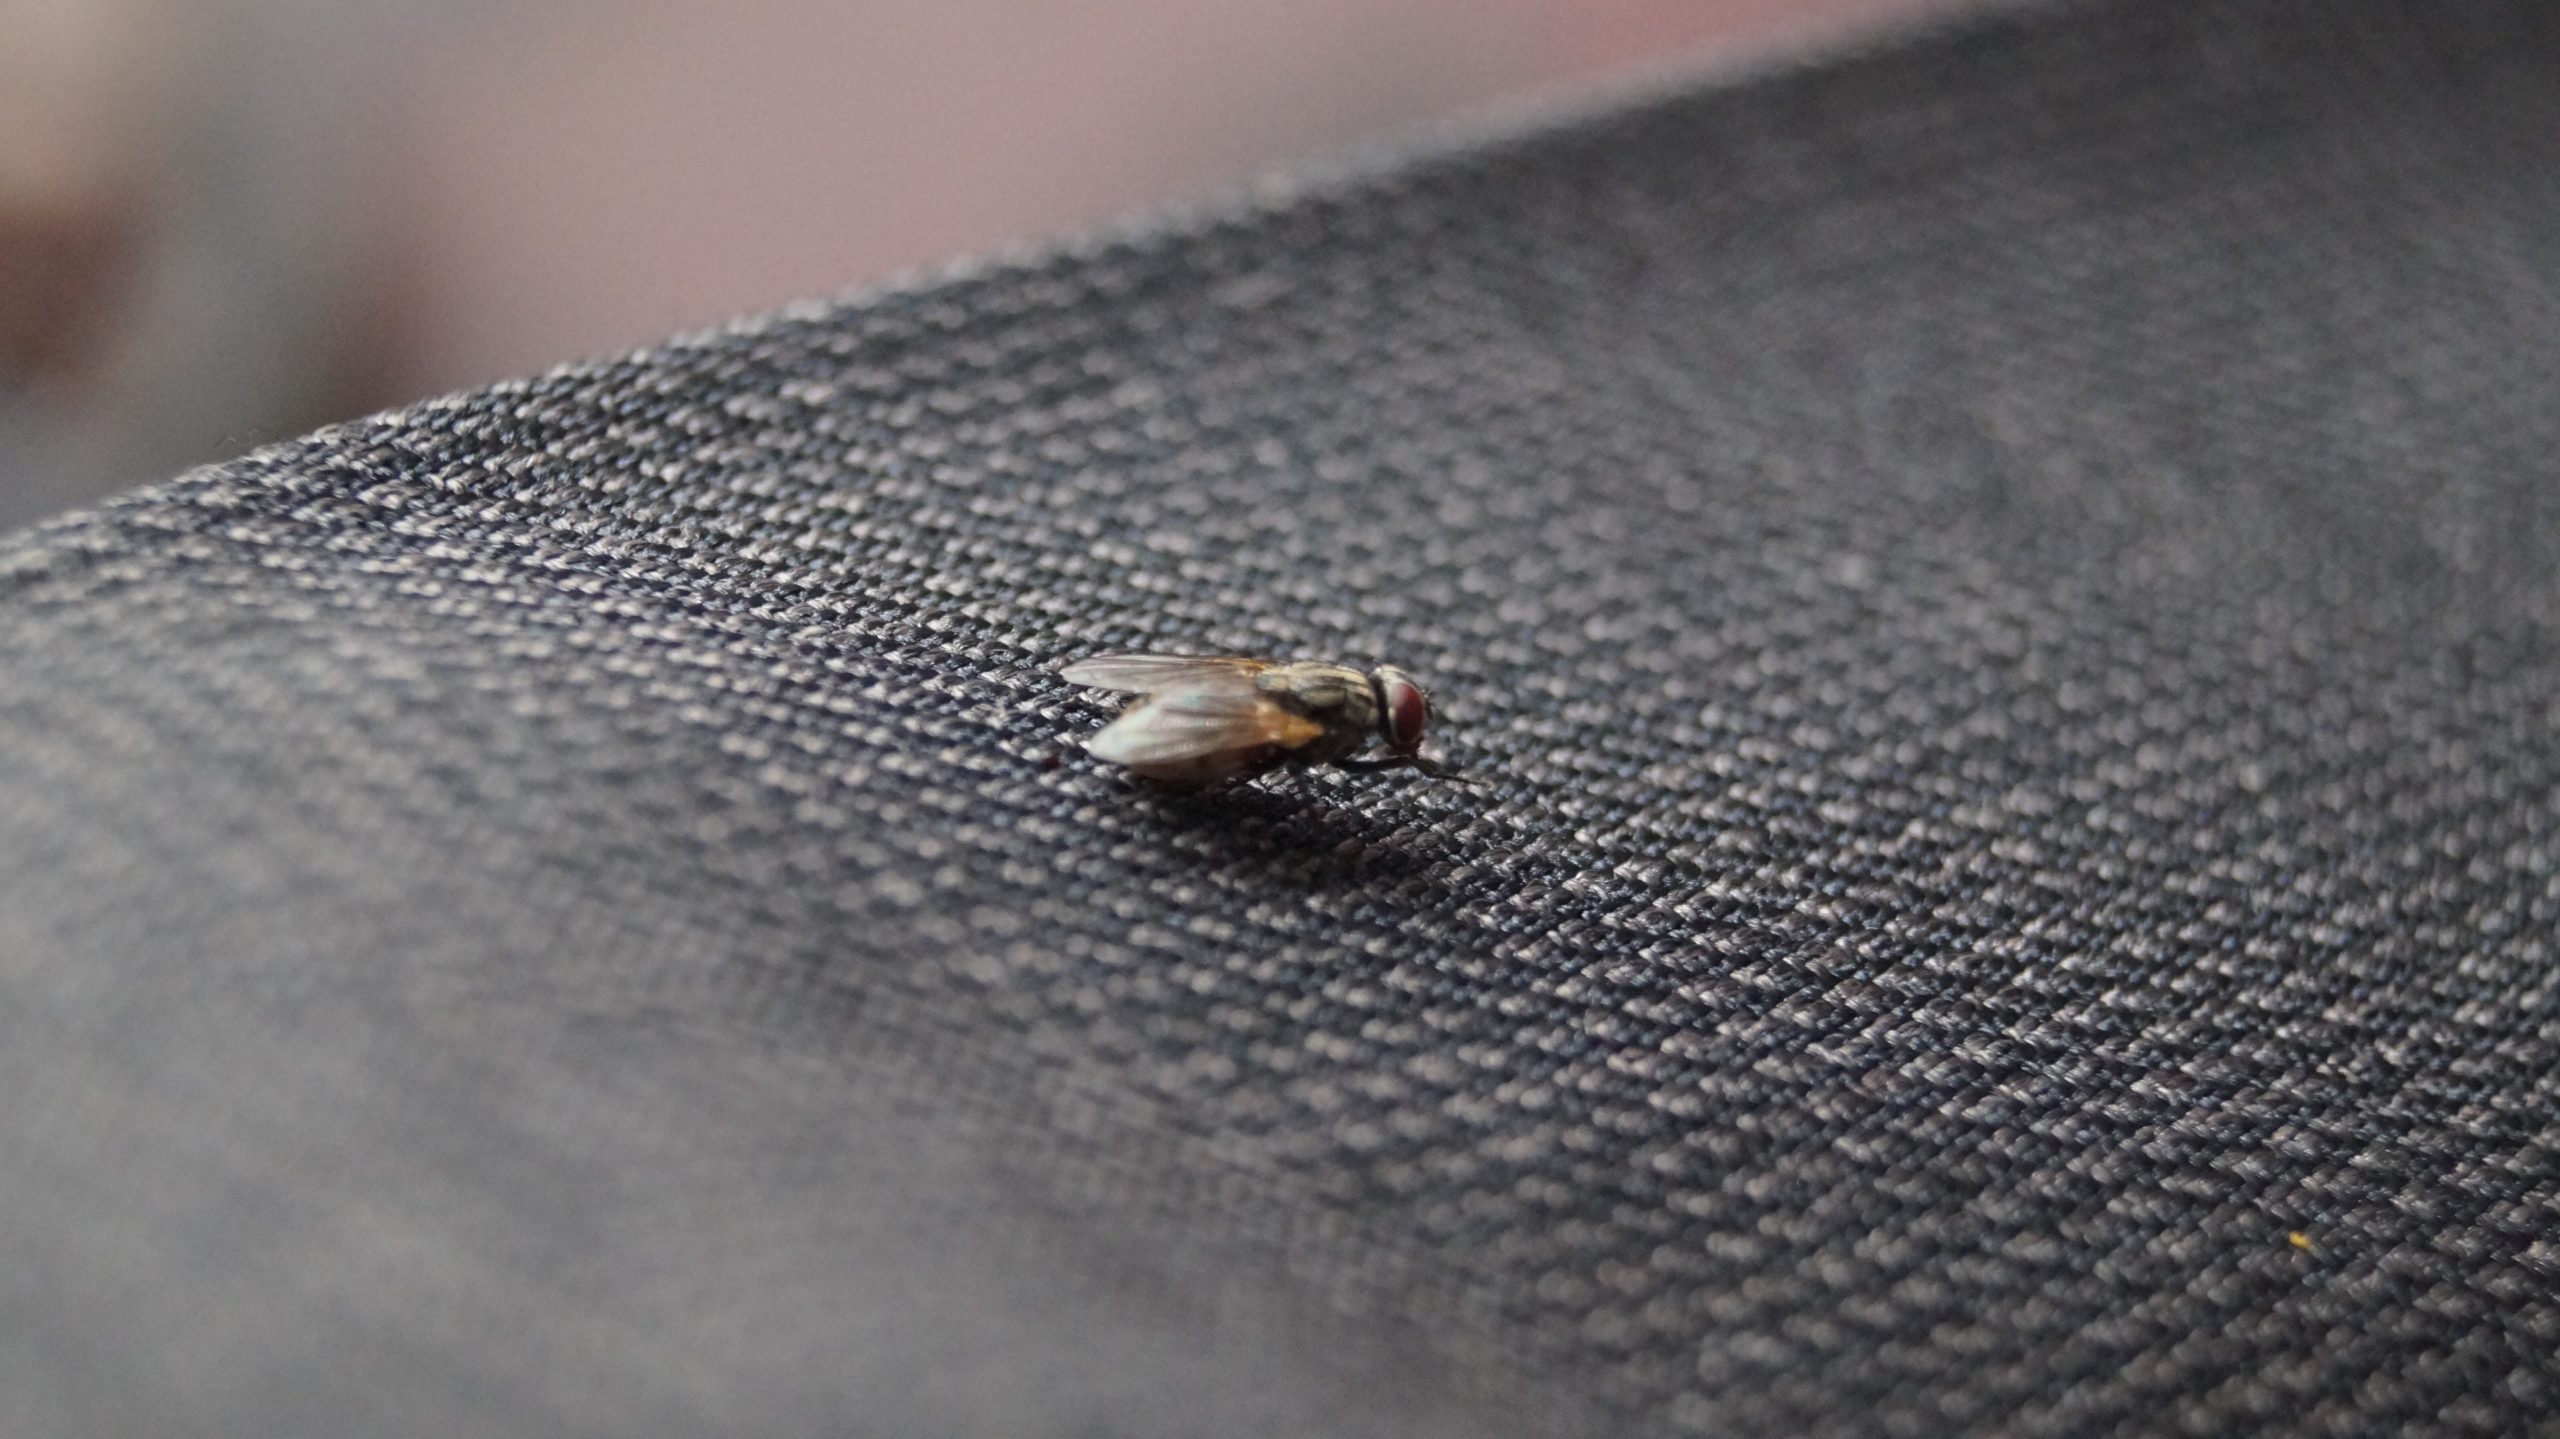 this is a picture of housefly in Oakland